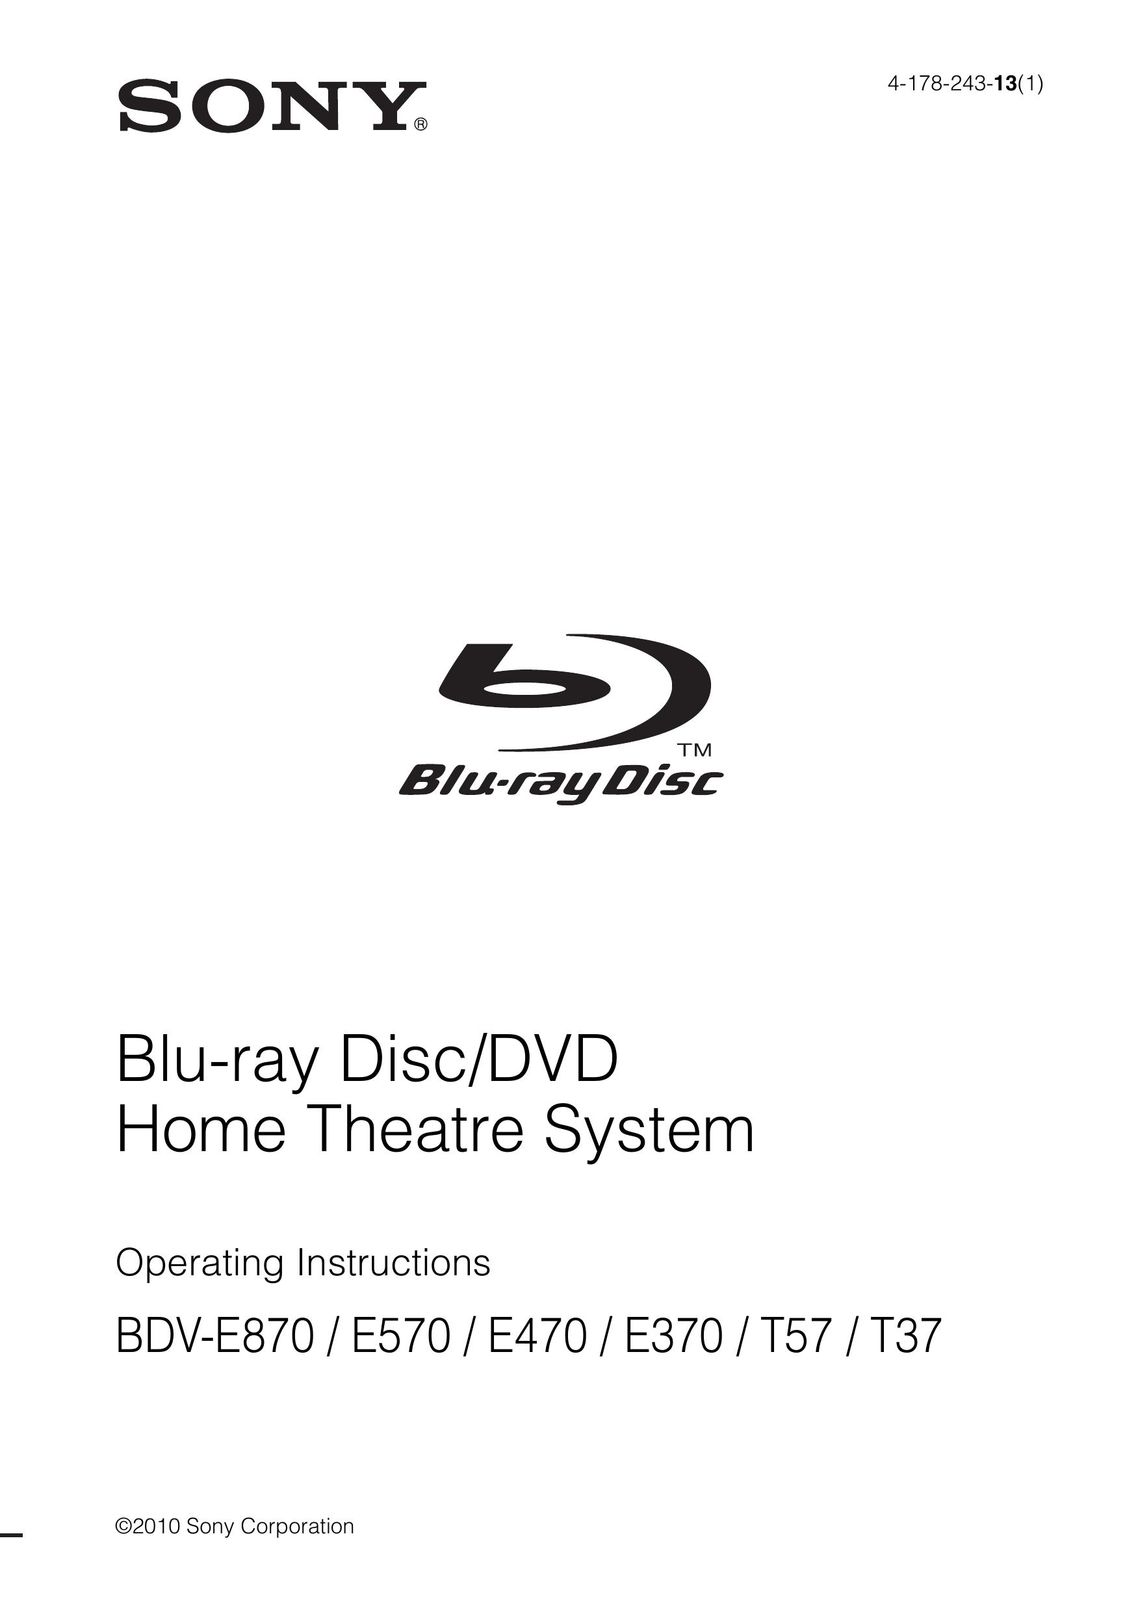 Sony BDV-E470 Home Theater System User Manual